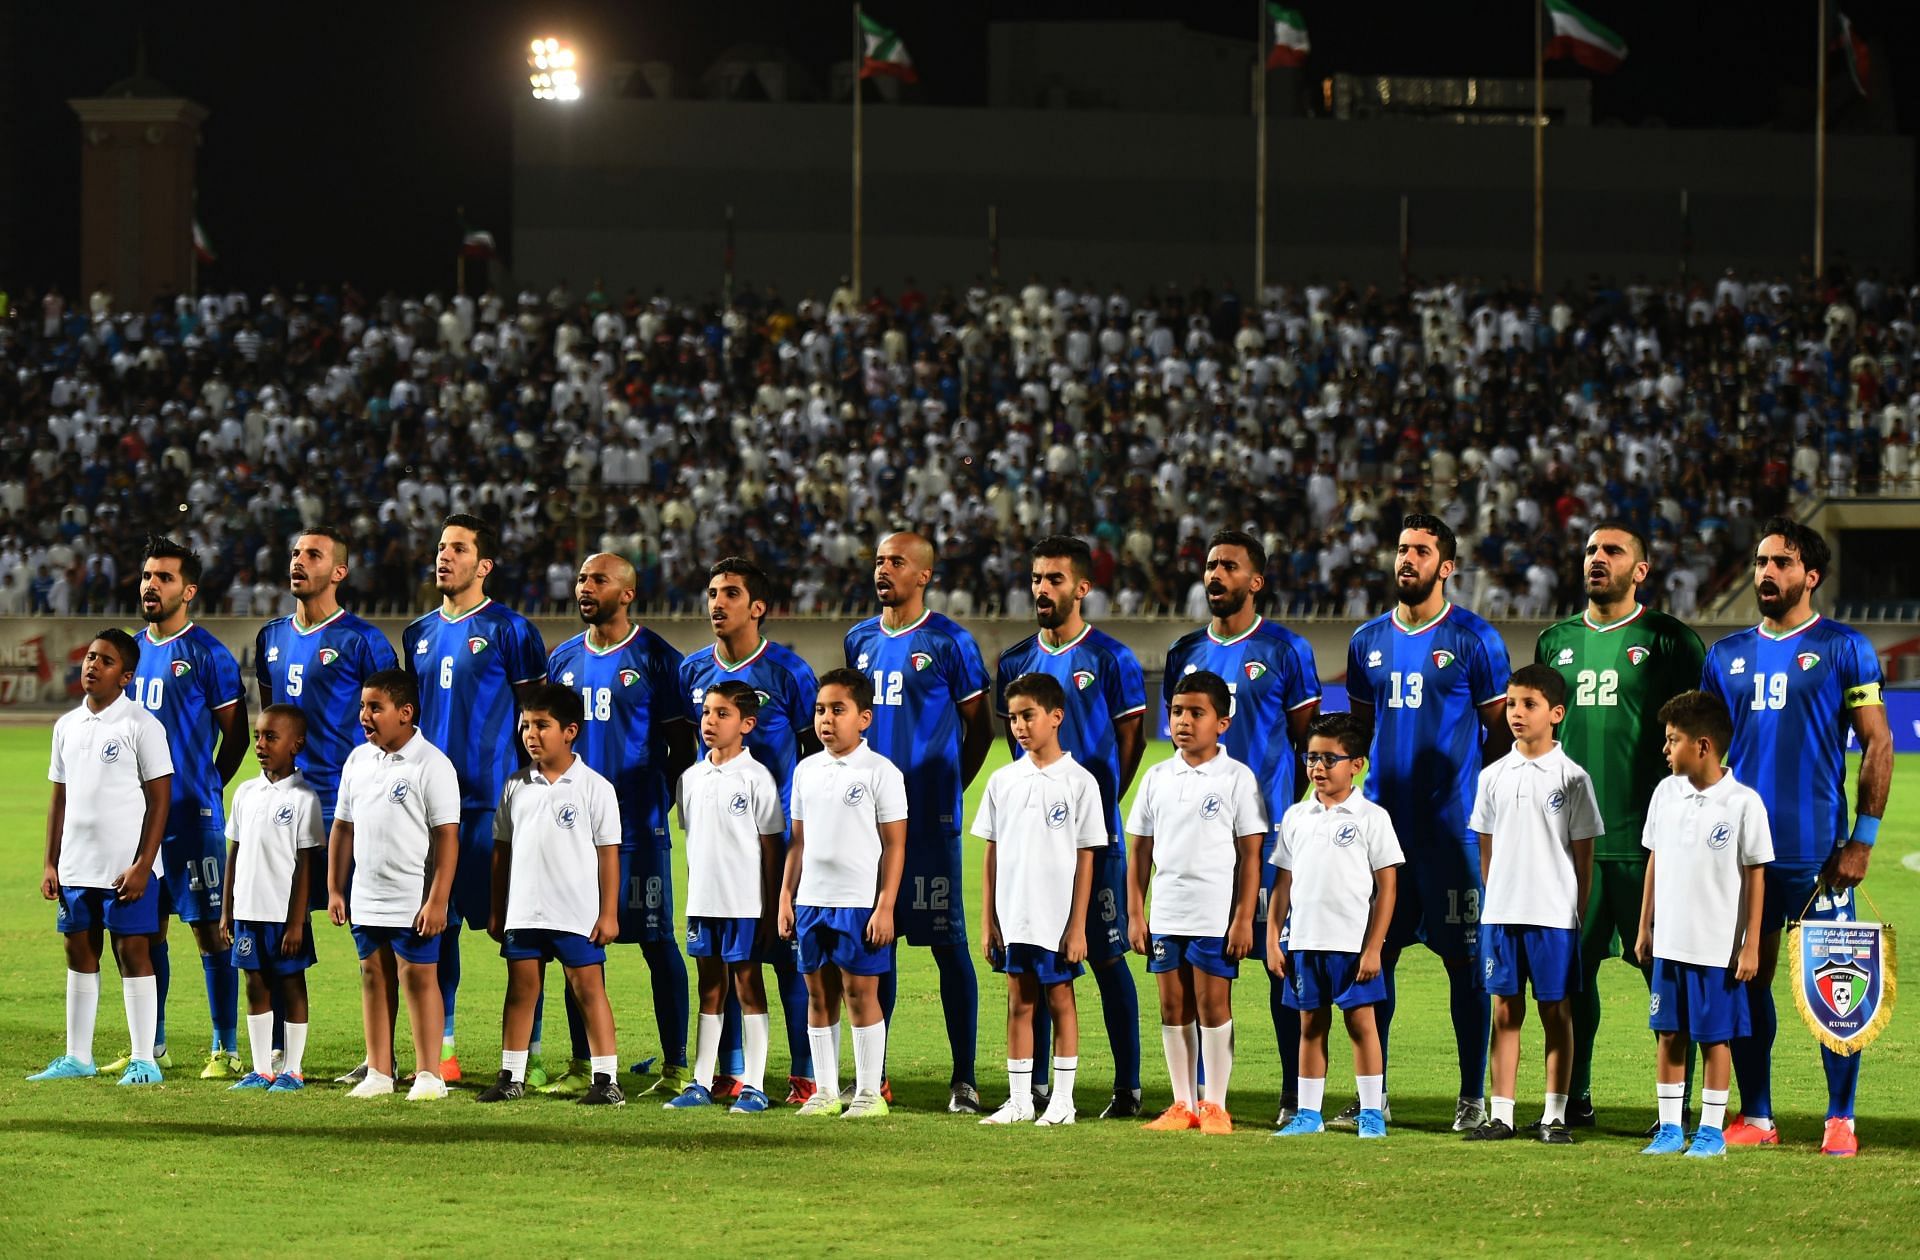 Kuwait and Singapore meet each other in a friendly match after more than 14 years